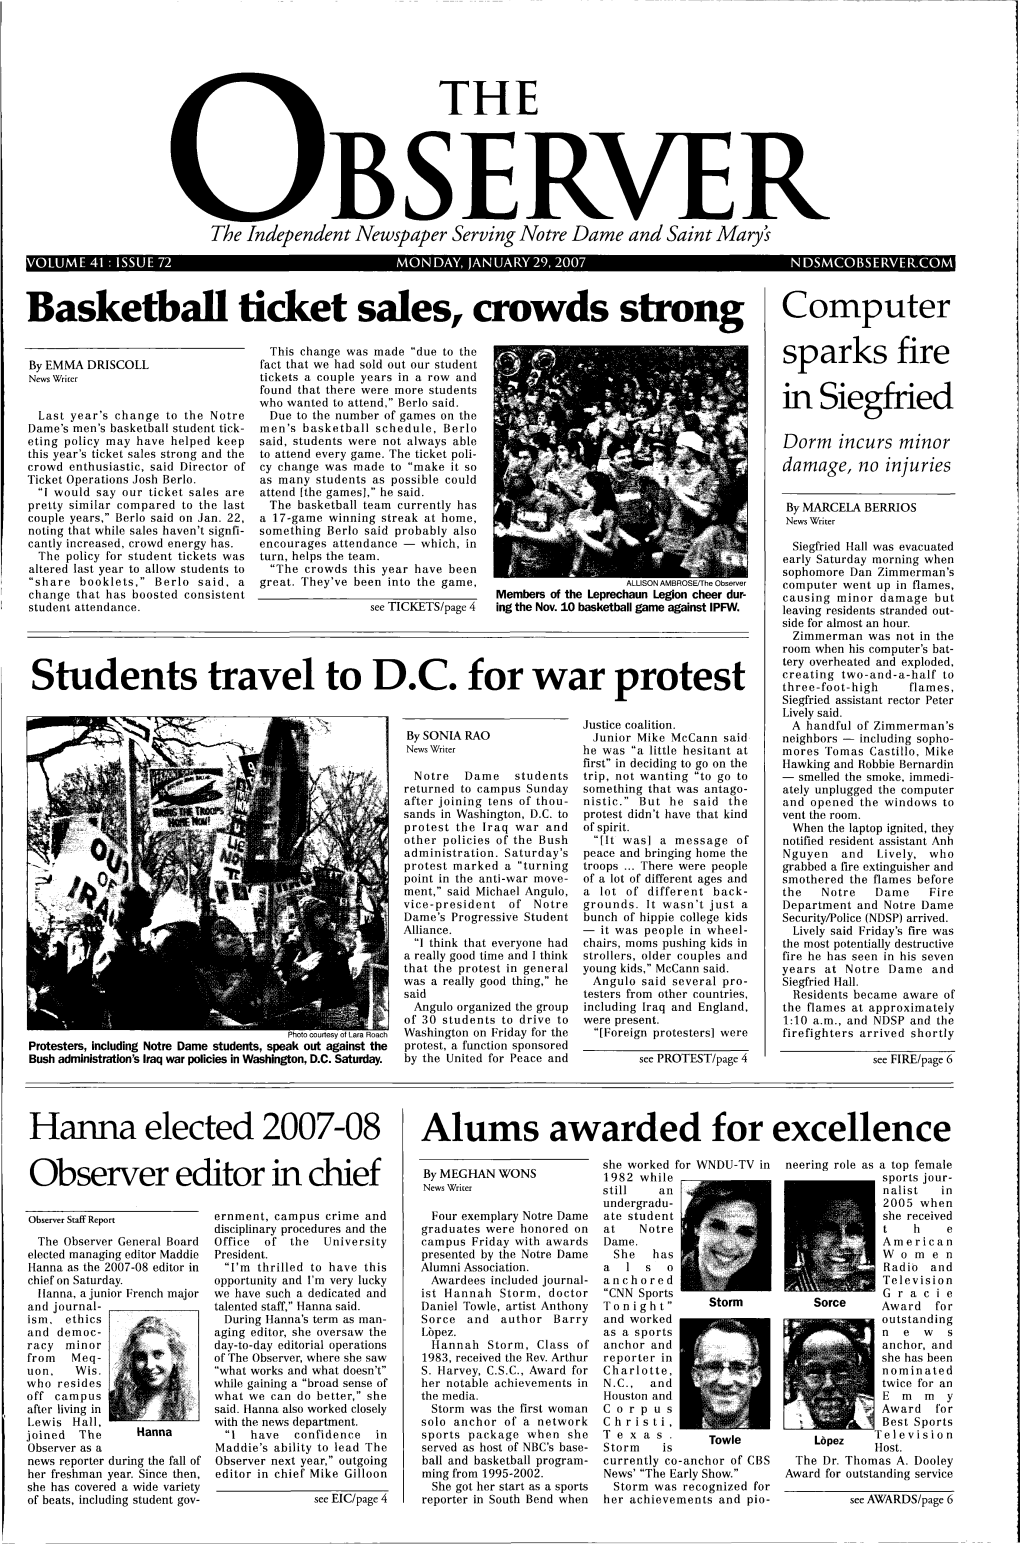 Basketball Ticket Sales, Crowds Strong Students Travel to D.C. for War